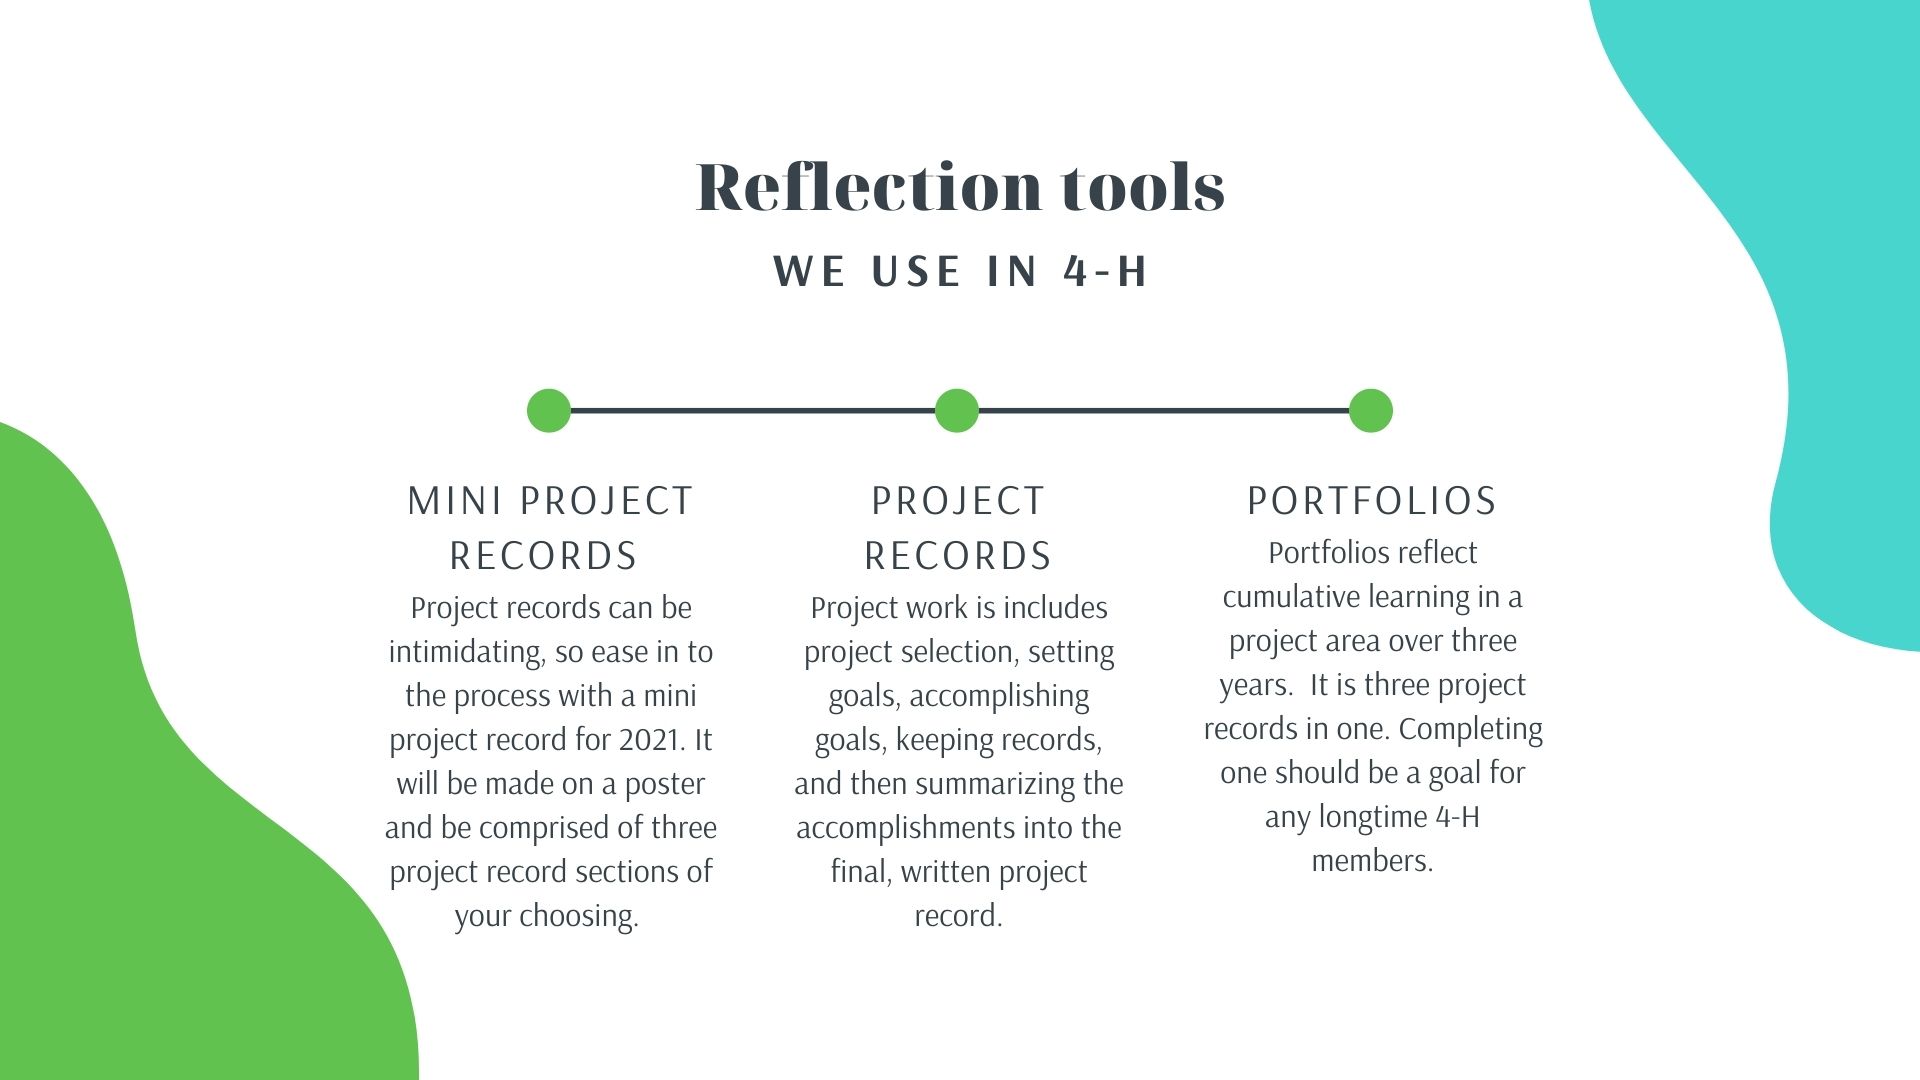 Mini Project Records, Project Records and Portfolios are three of the reflection tools we use in 4-H.